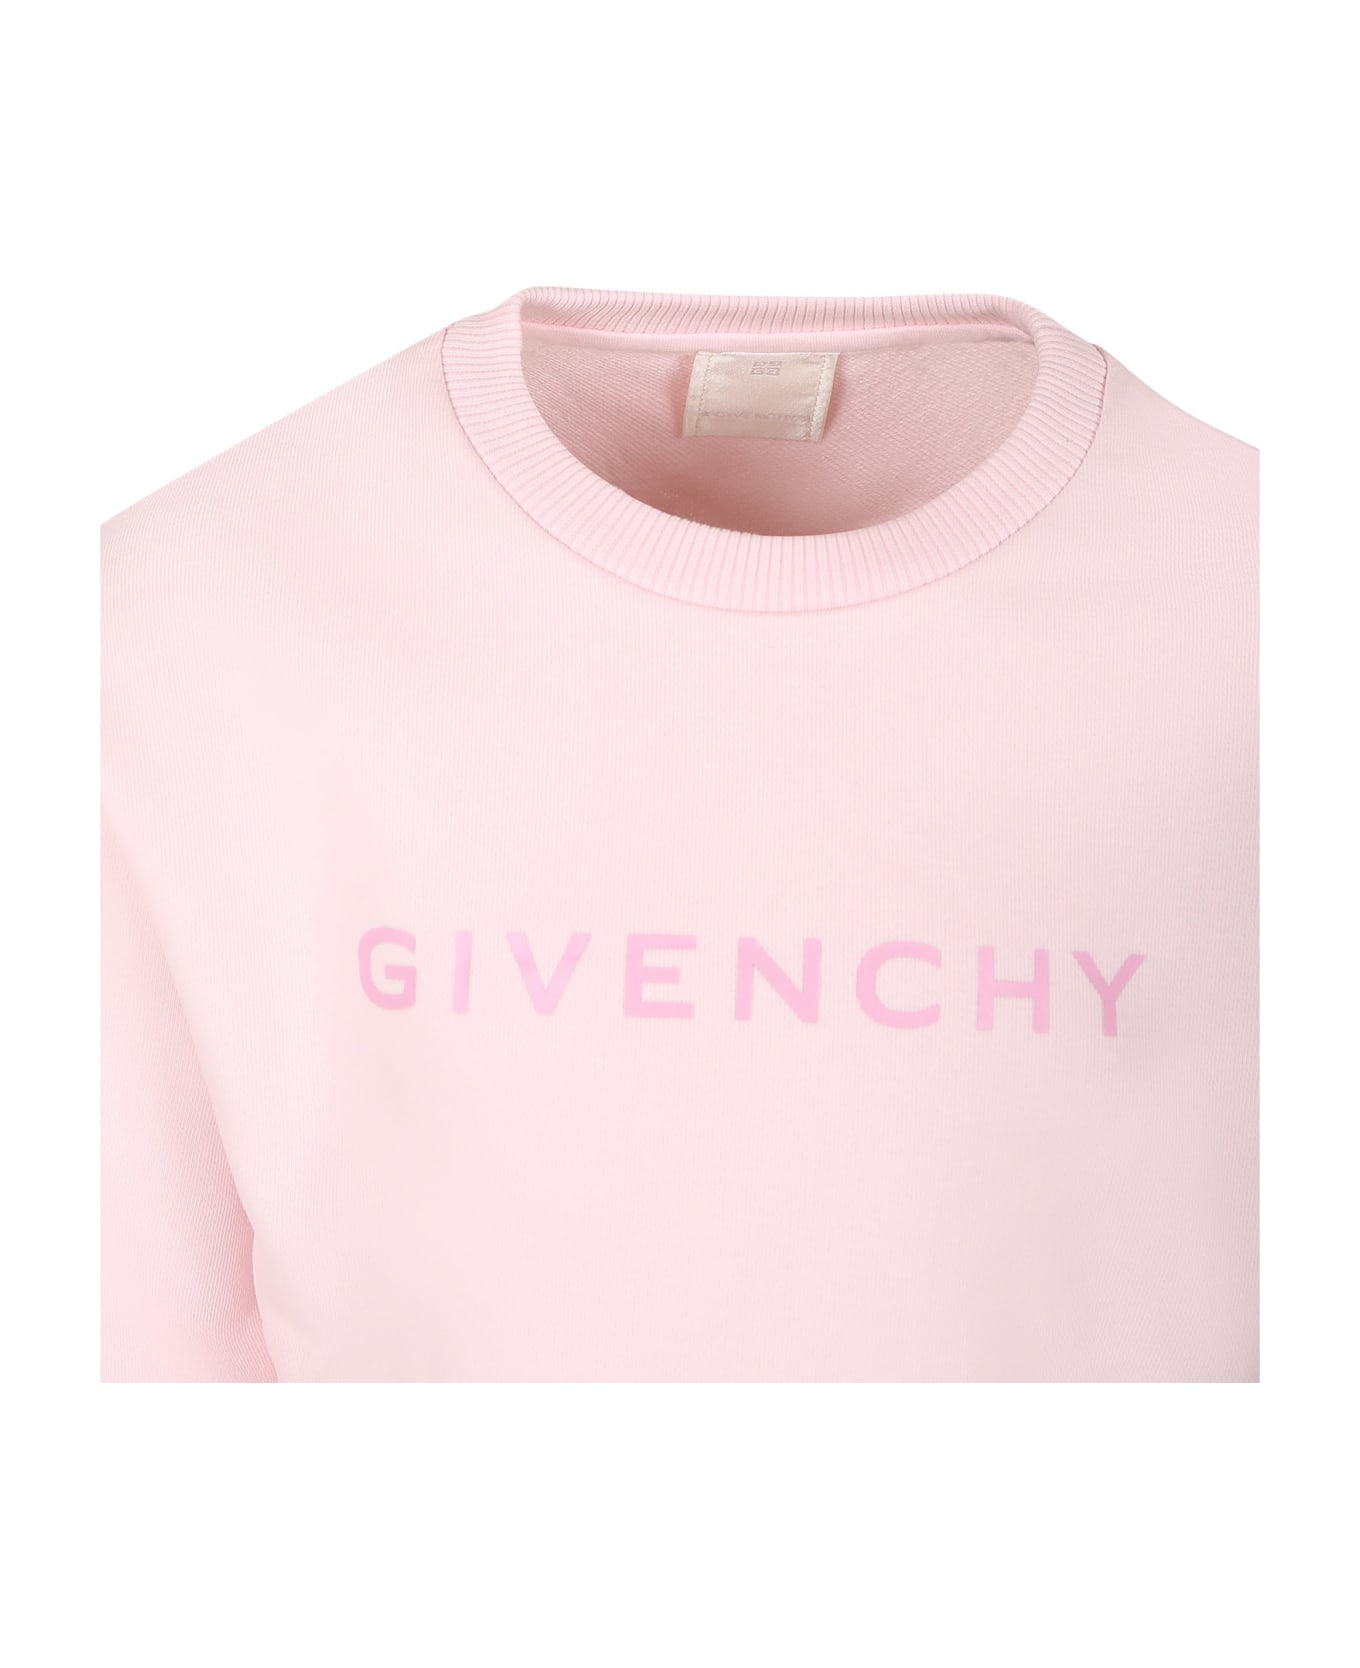 Givenchy Pink Sweatshirt For Girl With Logo - Pink